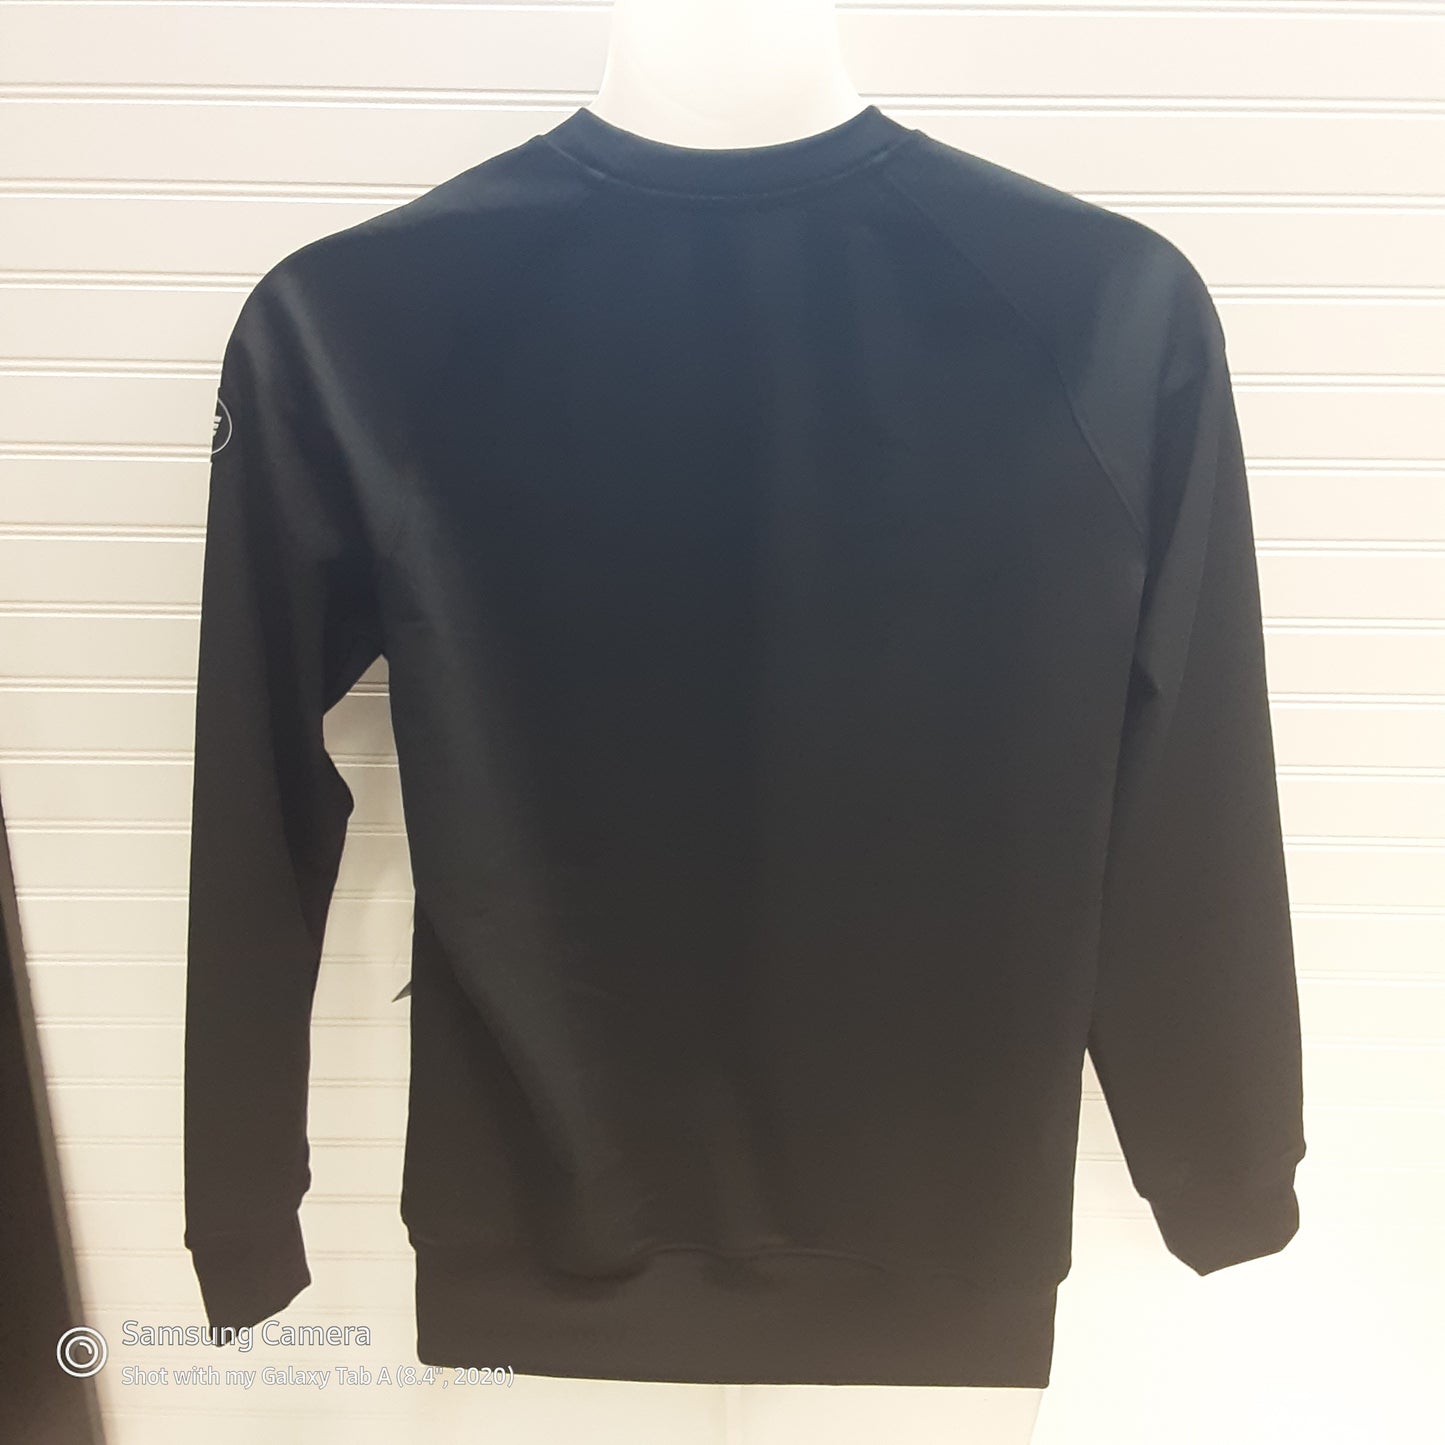 Athletic Top Long Sleeve Crewneck By Endeavor  Size: M